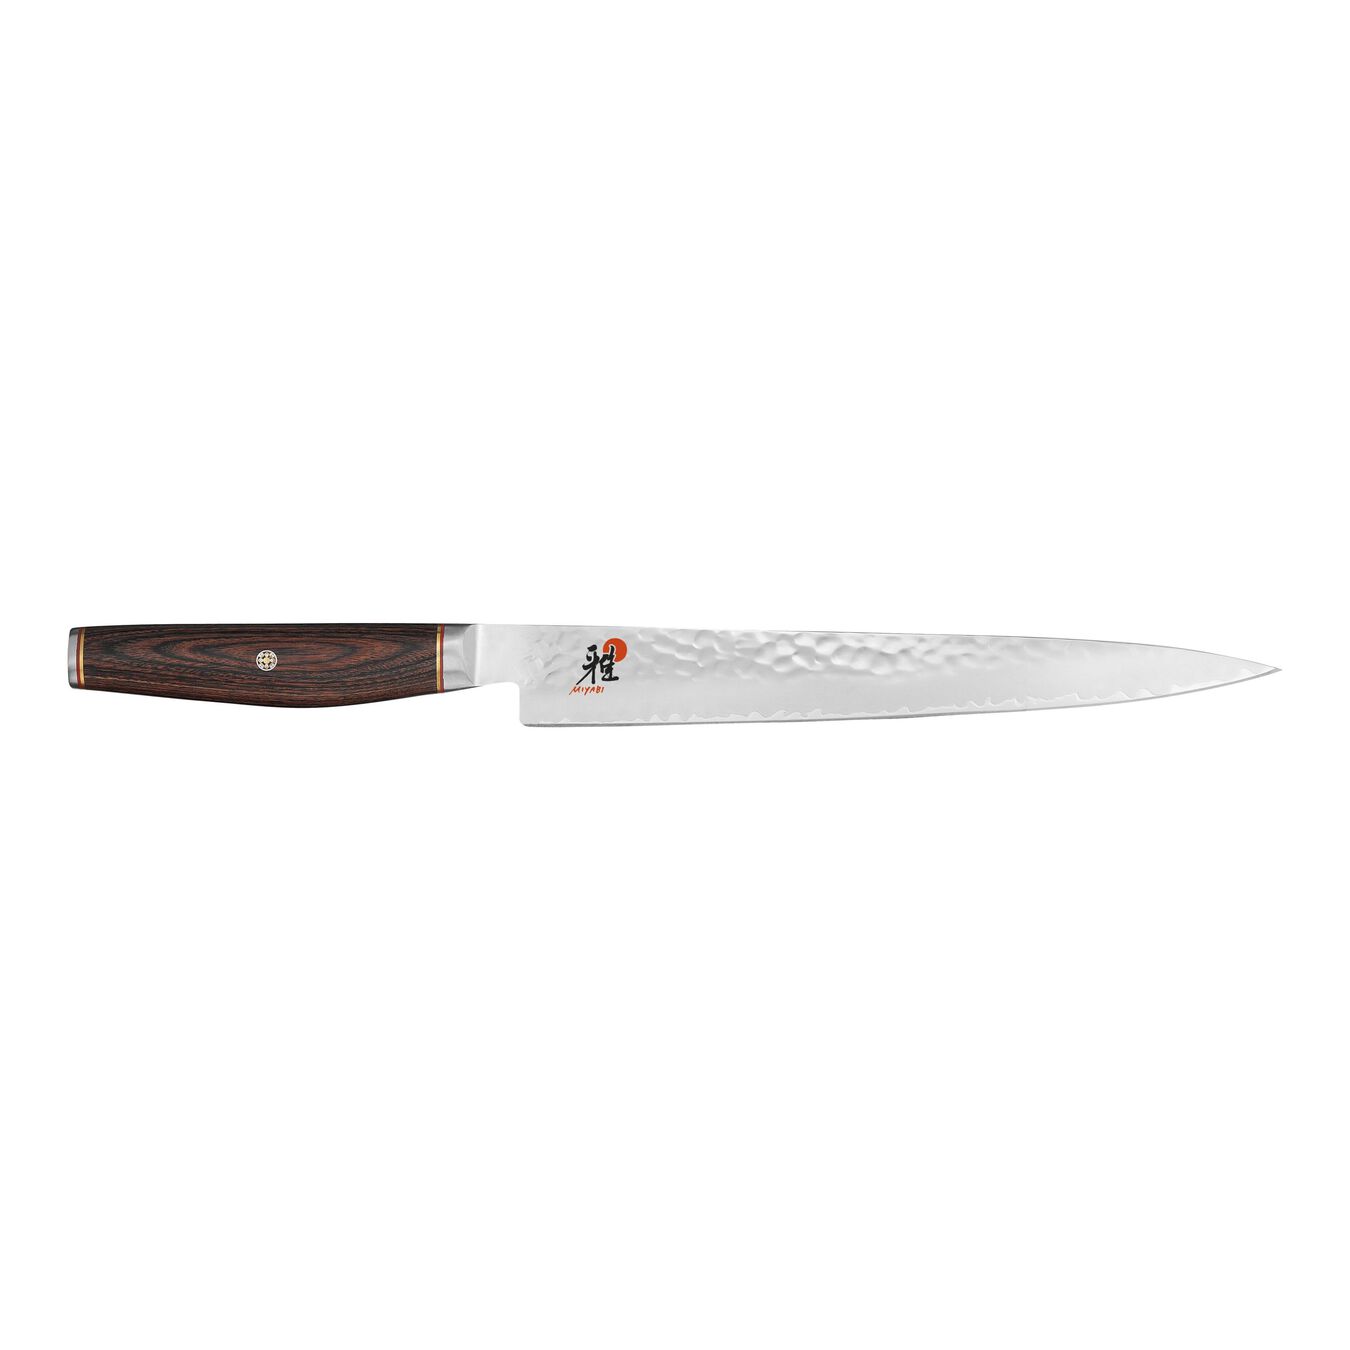 9.5-inch Pakka Wood Slicing/Carving Knife - Visual Imperfections,,large 1